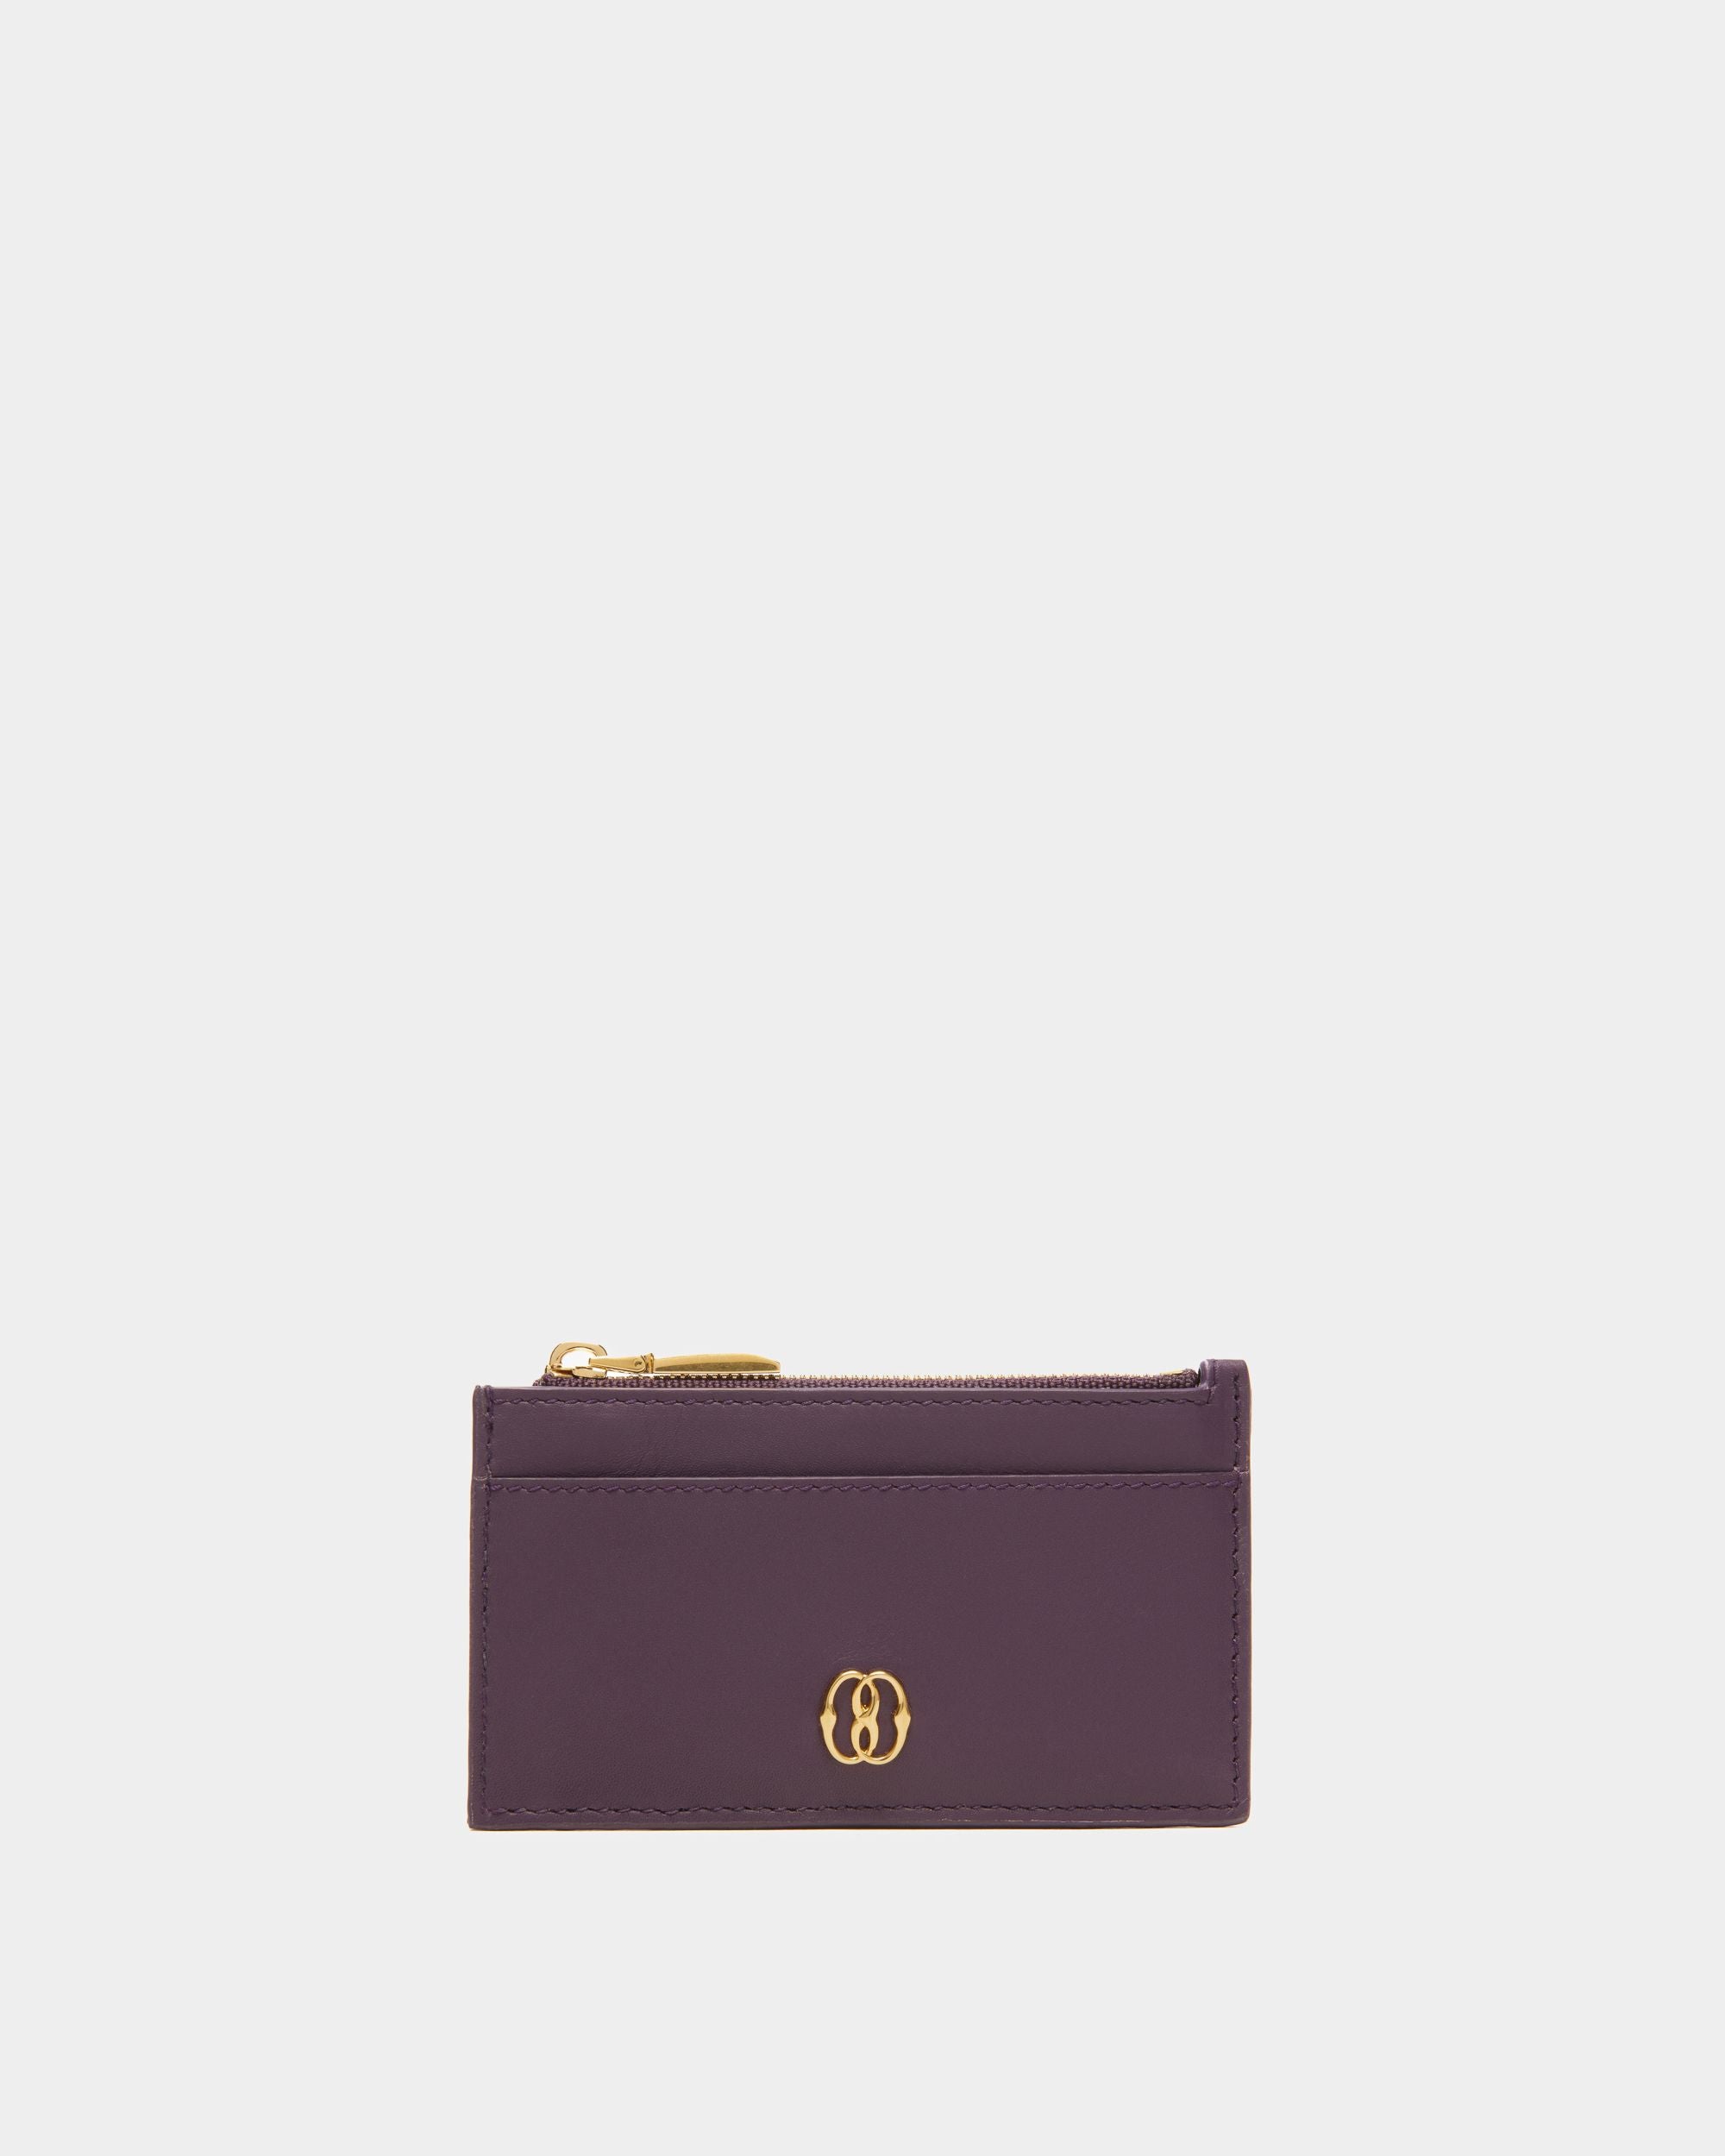 Emblem Zipped | Women's Business Card Holder | Orchid Leather | Bally | Still Life Front